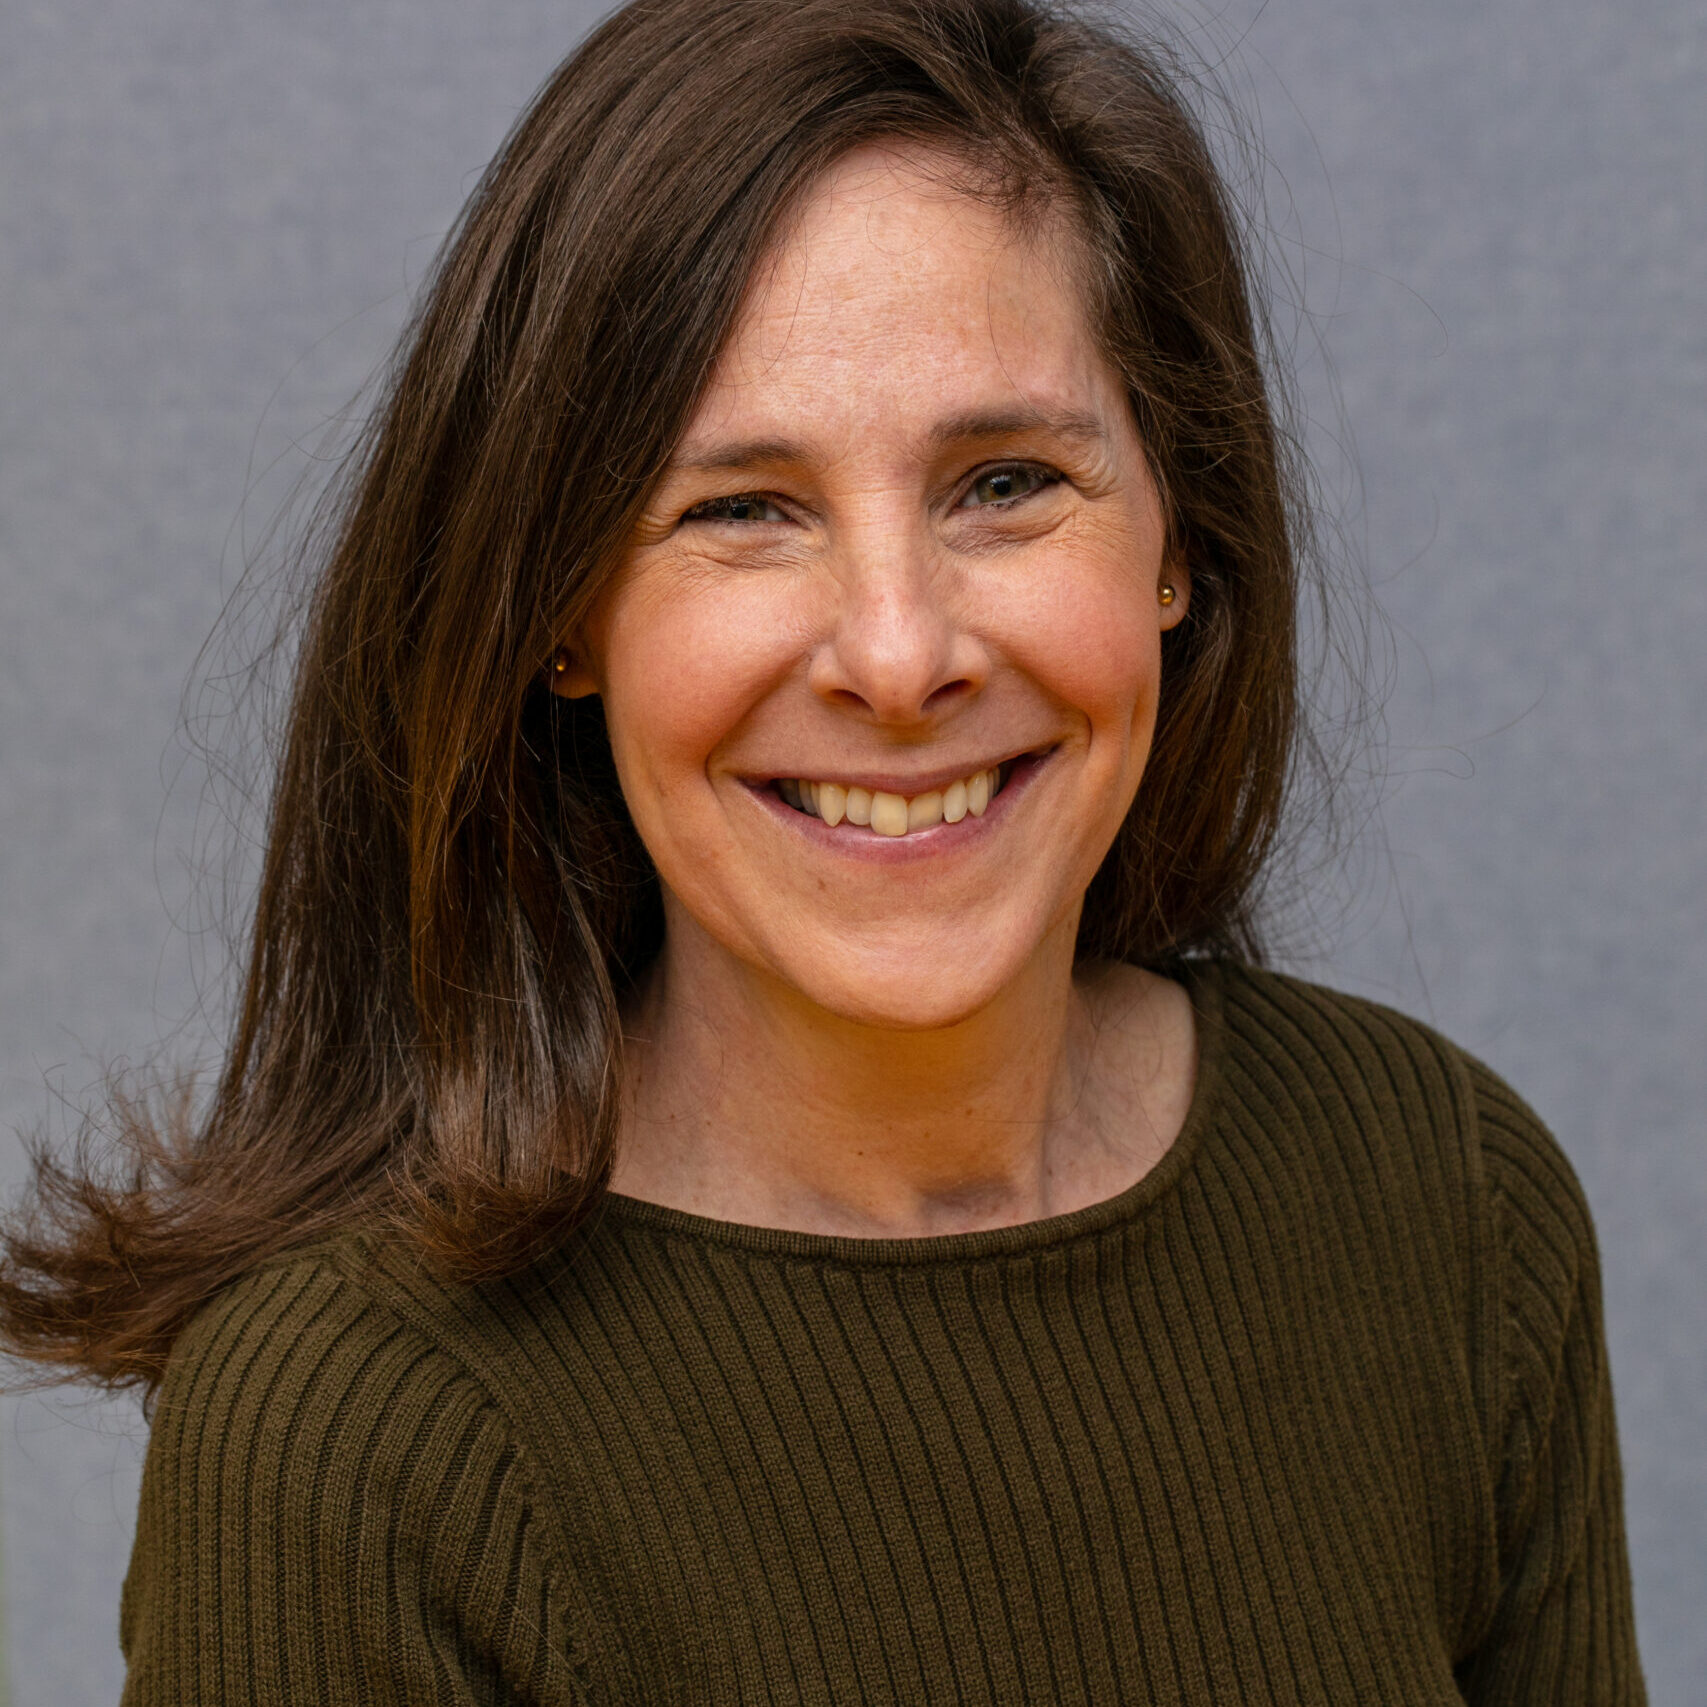 Dark-haired woman in brown shirt smiling